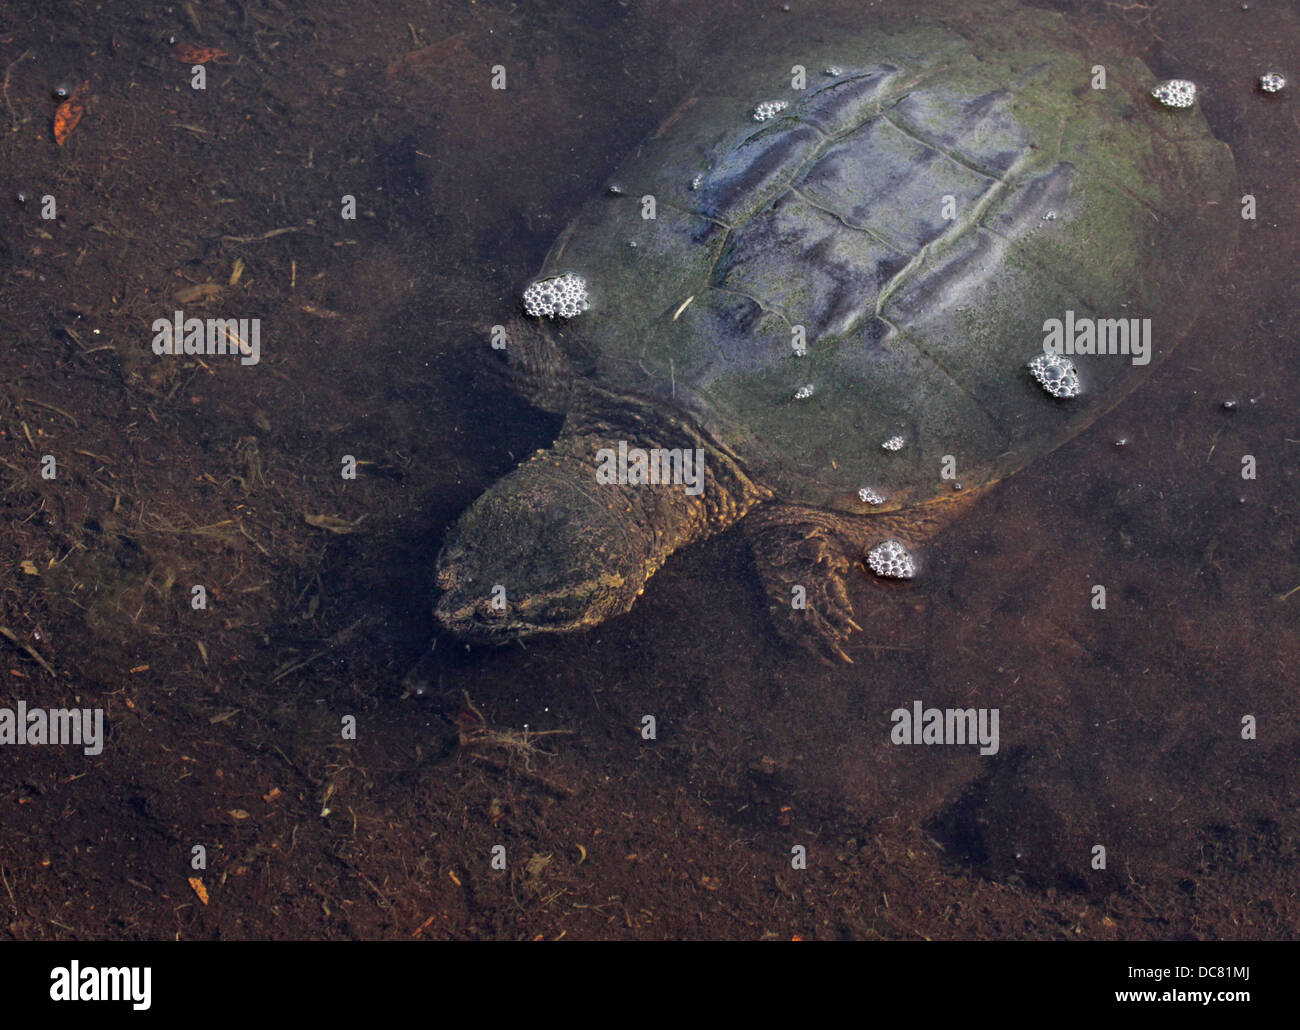 Underwater Snapping Turtle Stock Photo